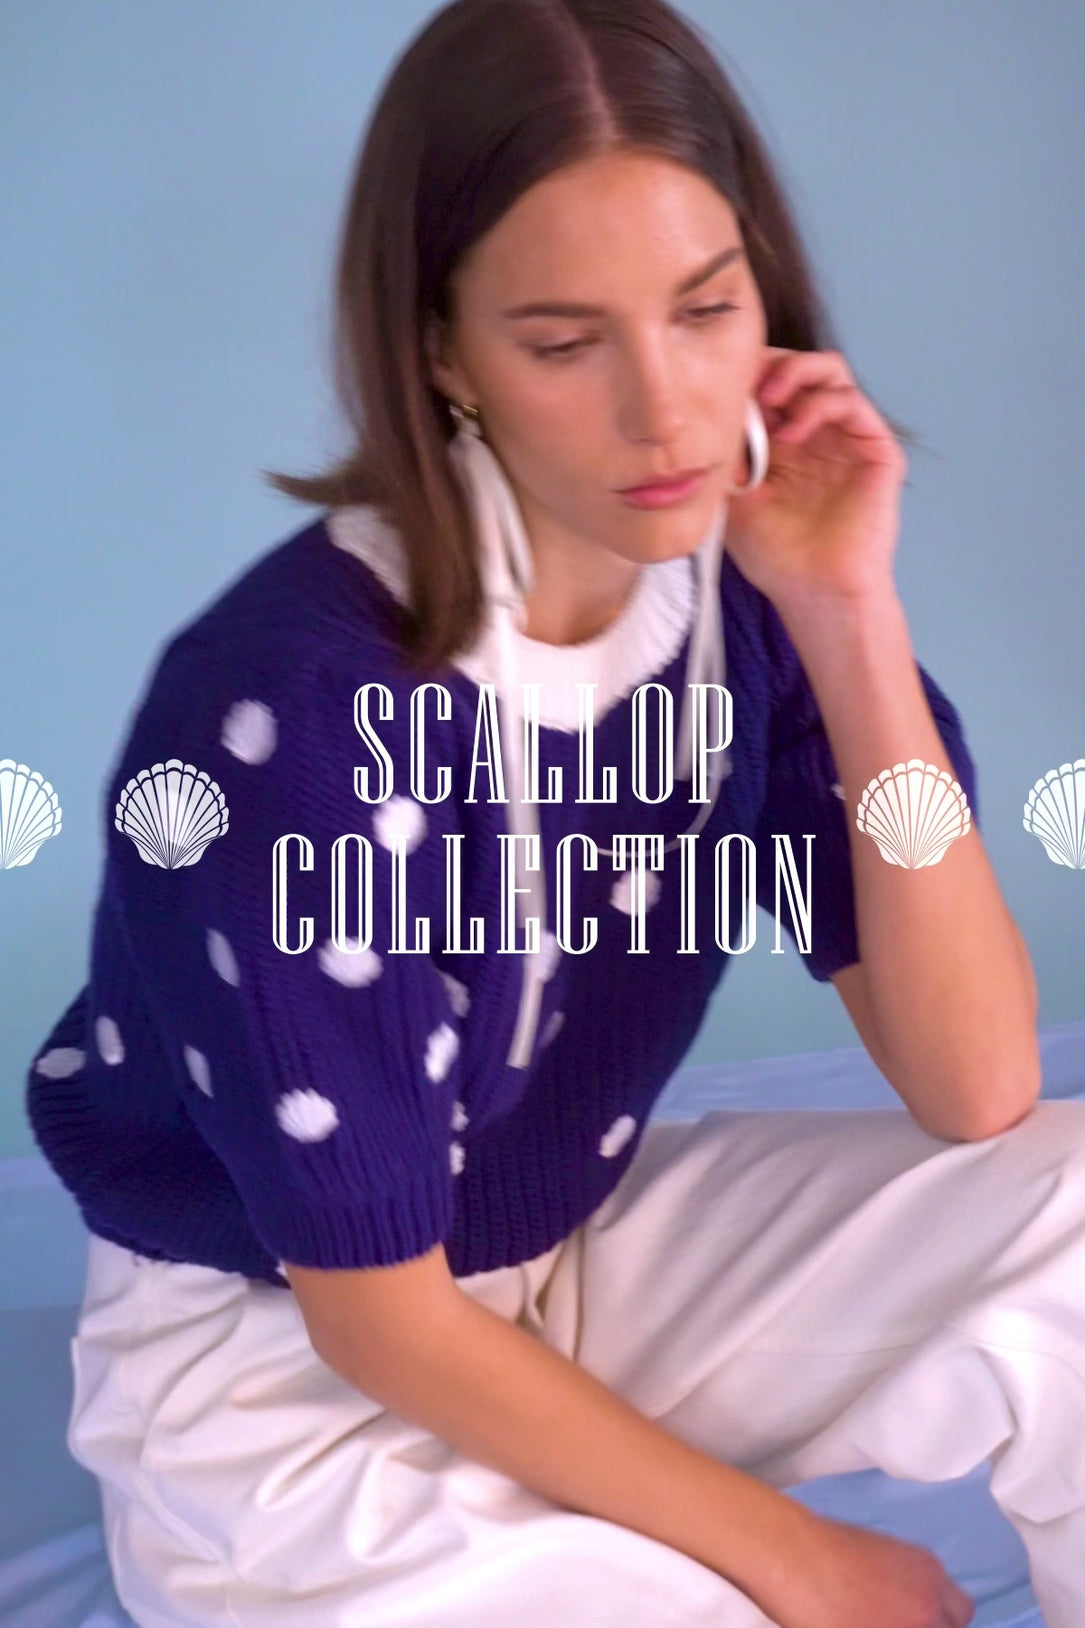 Shop the Scallop Collection in Women's Clothing from English Factory at shopenglishfactory.com